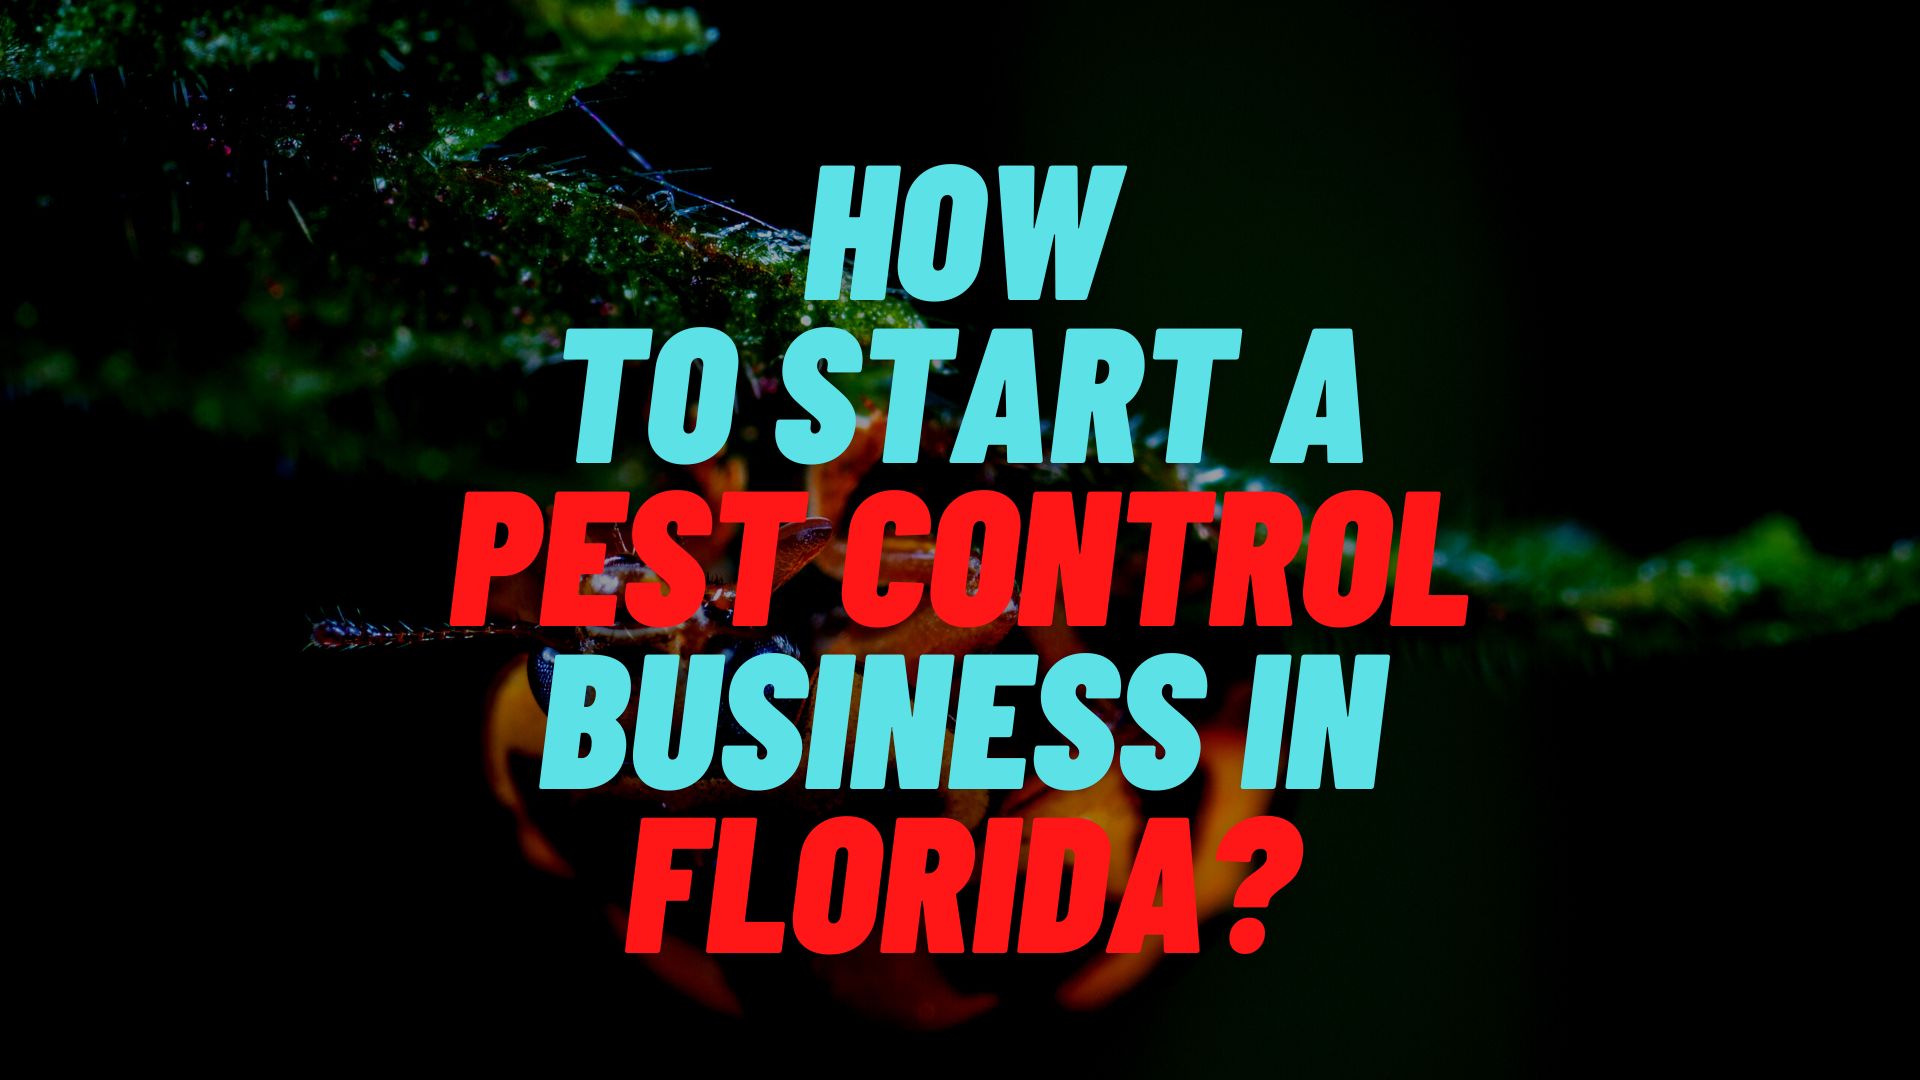 How to start a pest control business in Florida?